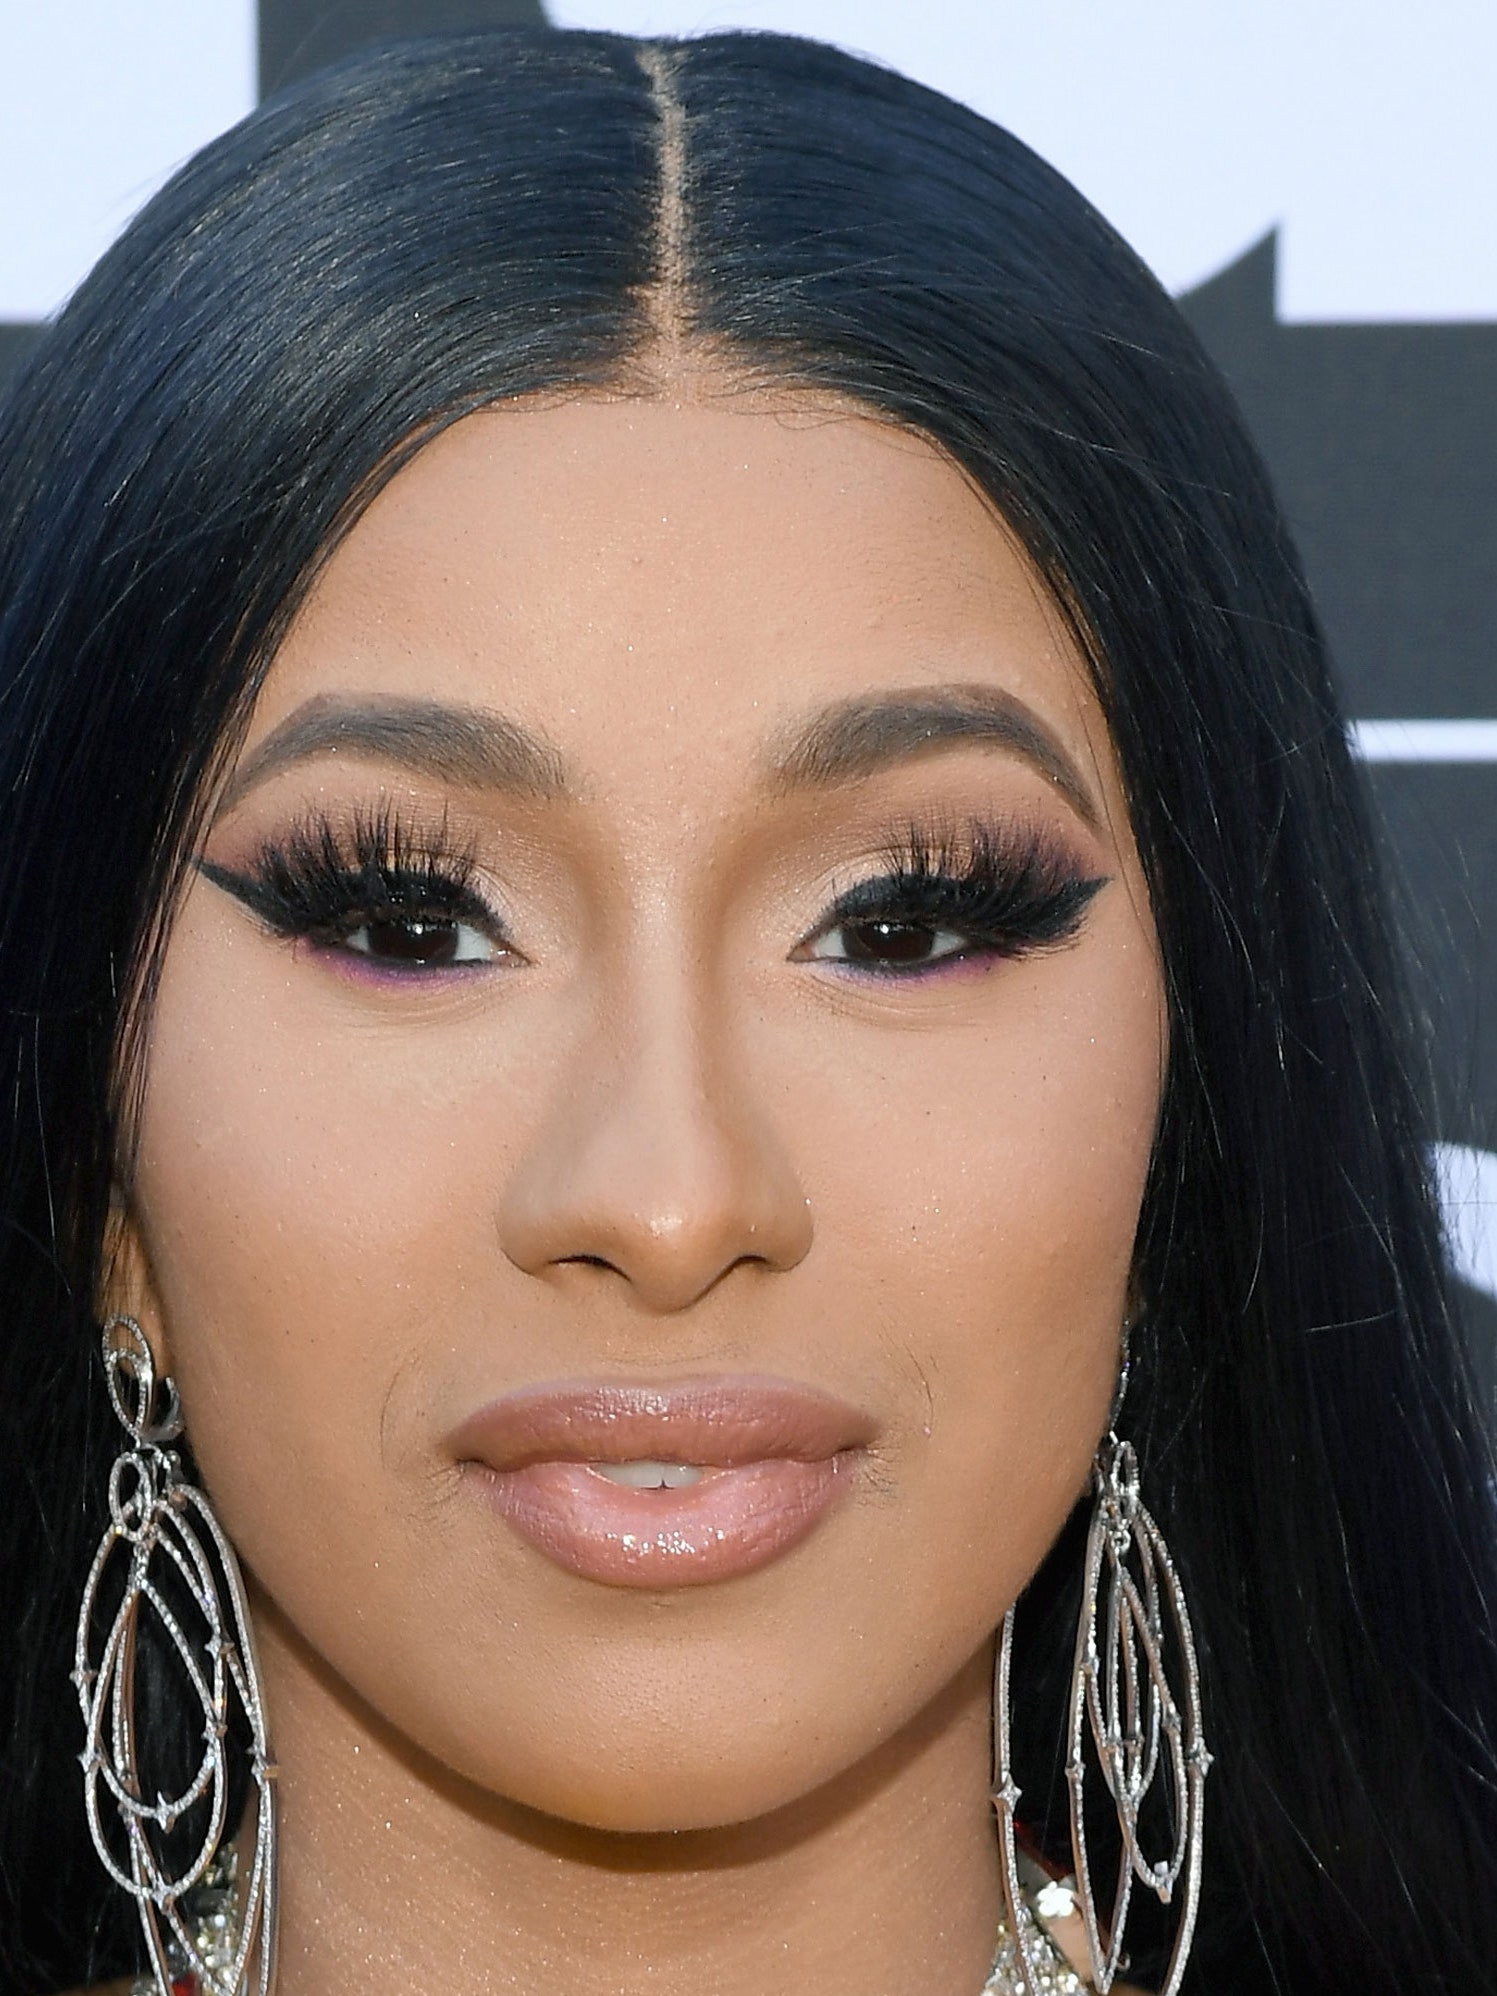 Cardi B Just Debuted Bangs With Her Latest Hair Look